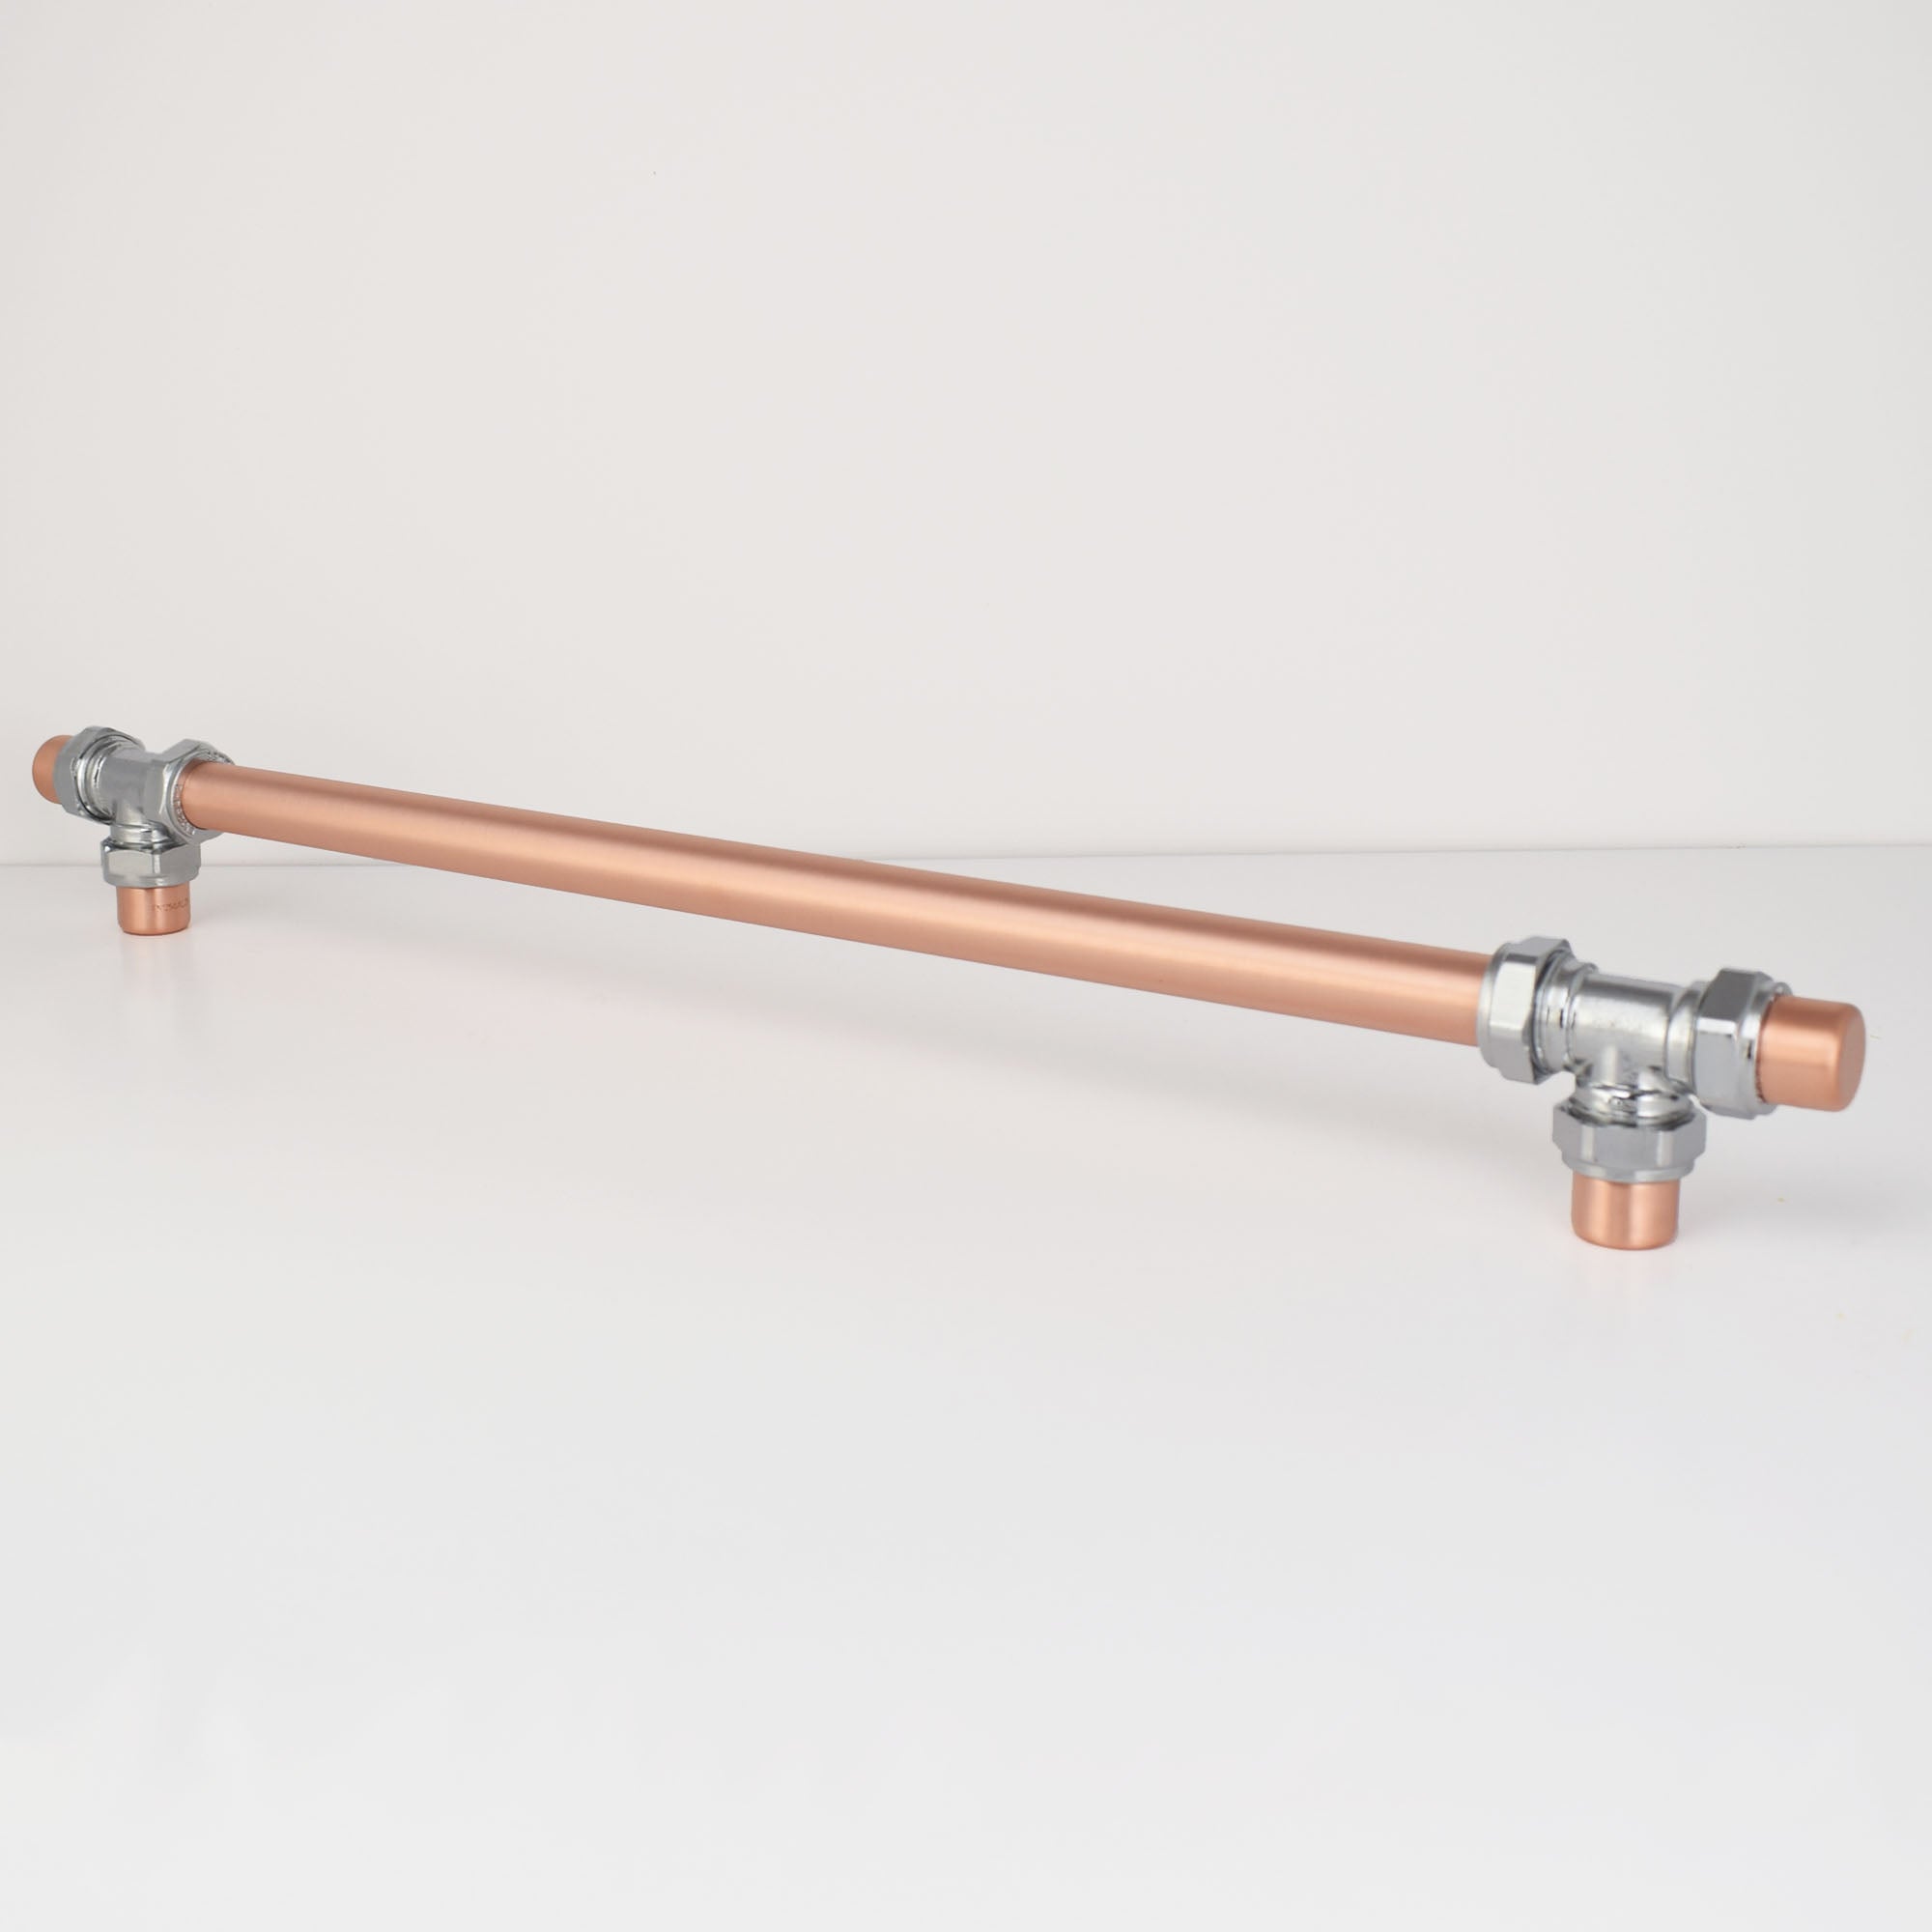 Chrome and Copper T- Bar Barn Door Pull on plain background